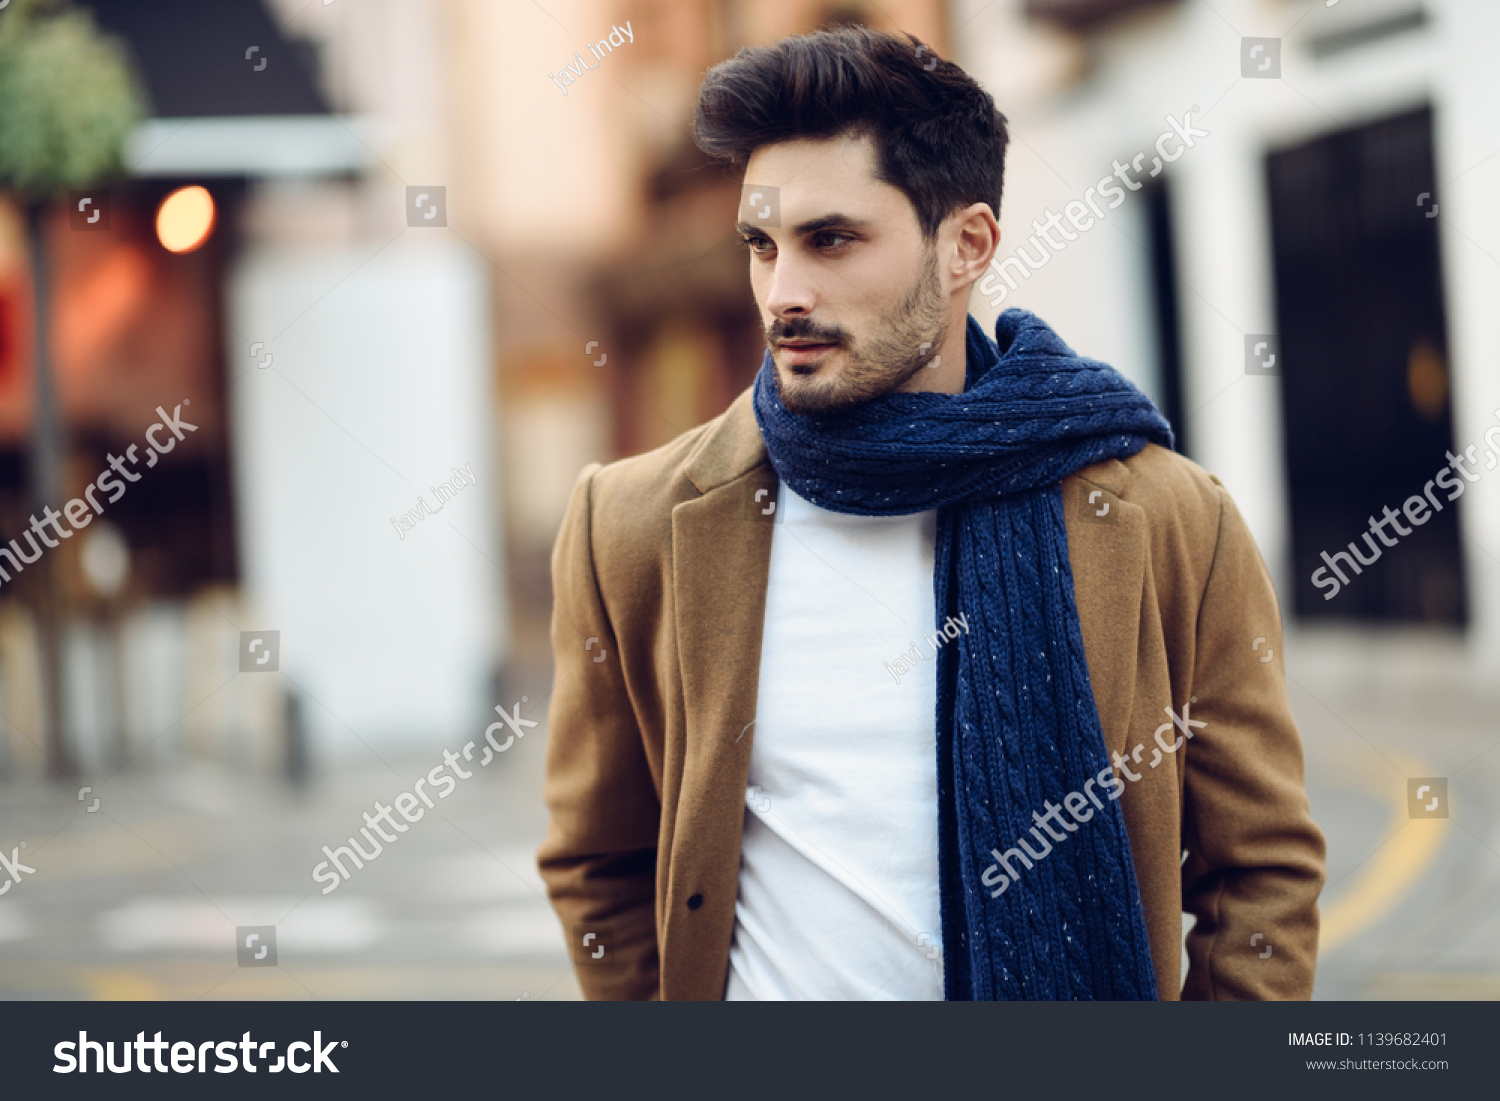 Young man wearing winter clothes in the street. Young bearded guy with modern hairstyle with coat, scarf, blue jeans and t-shirt. #1139682401